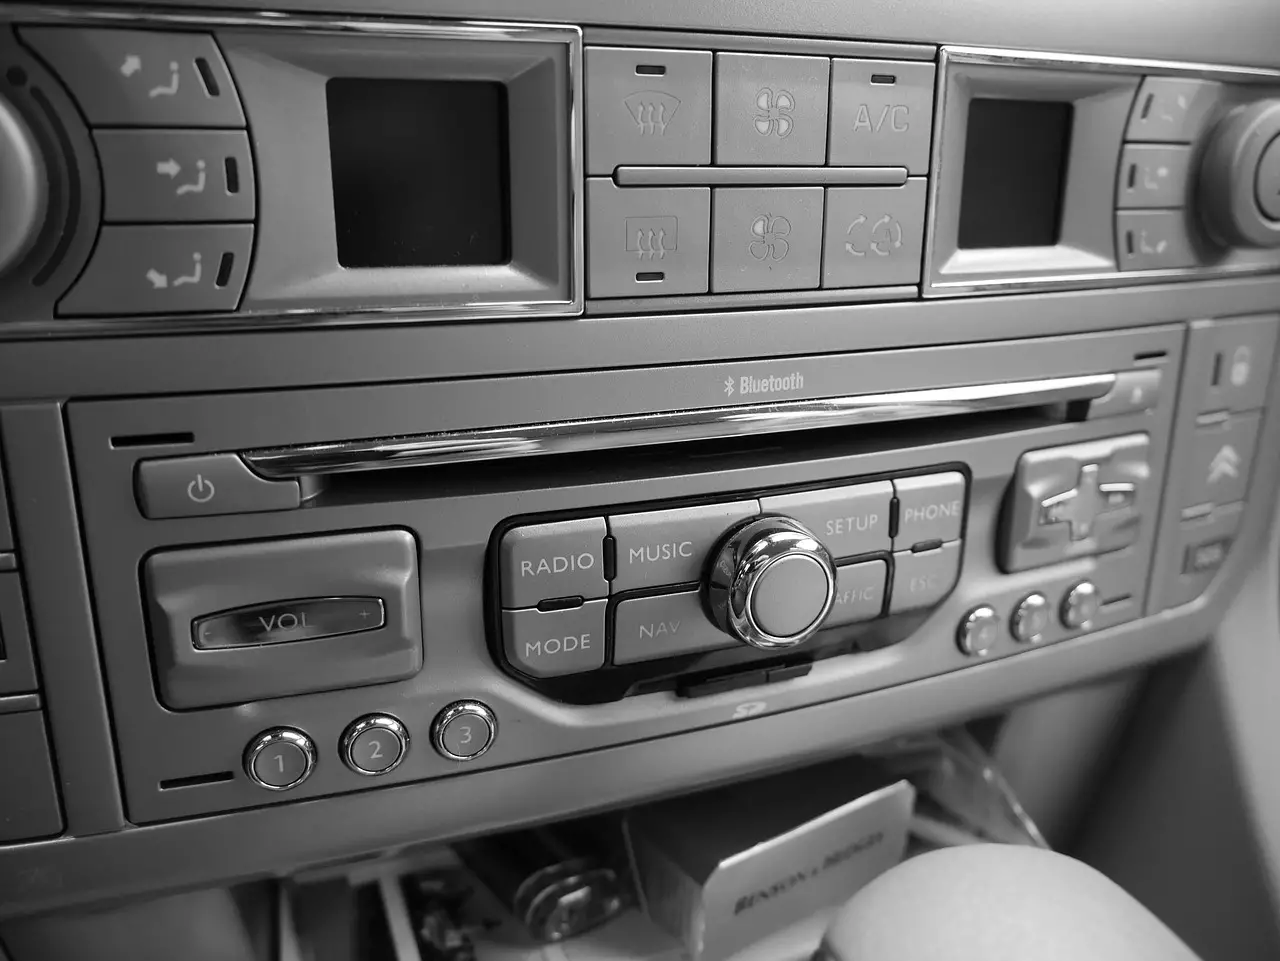 How To Clean a CD Player In a Car